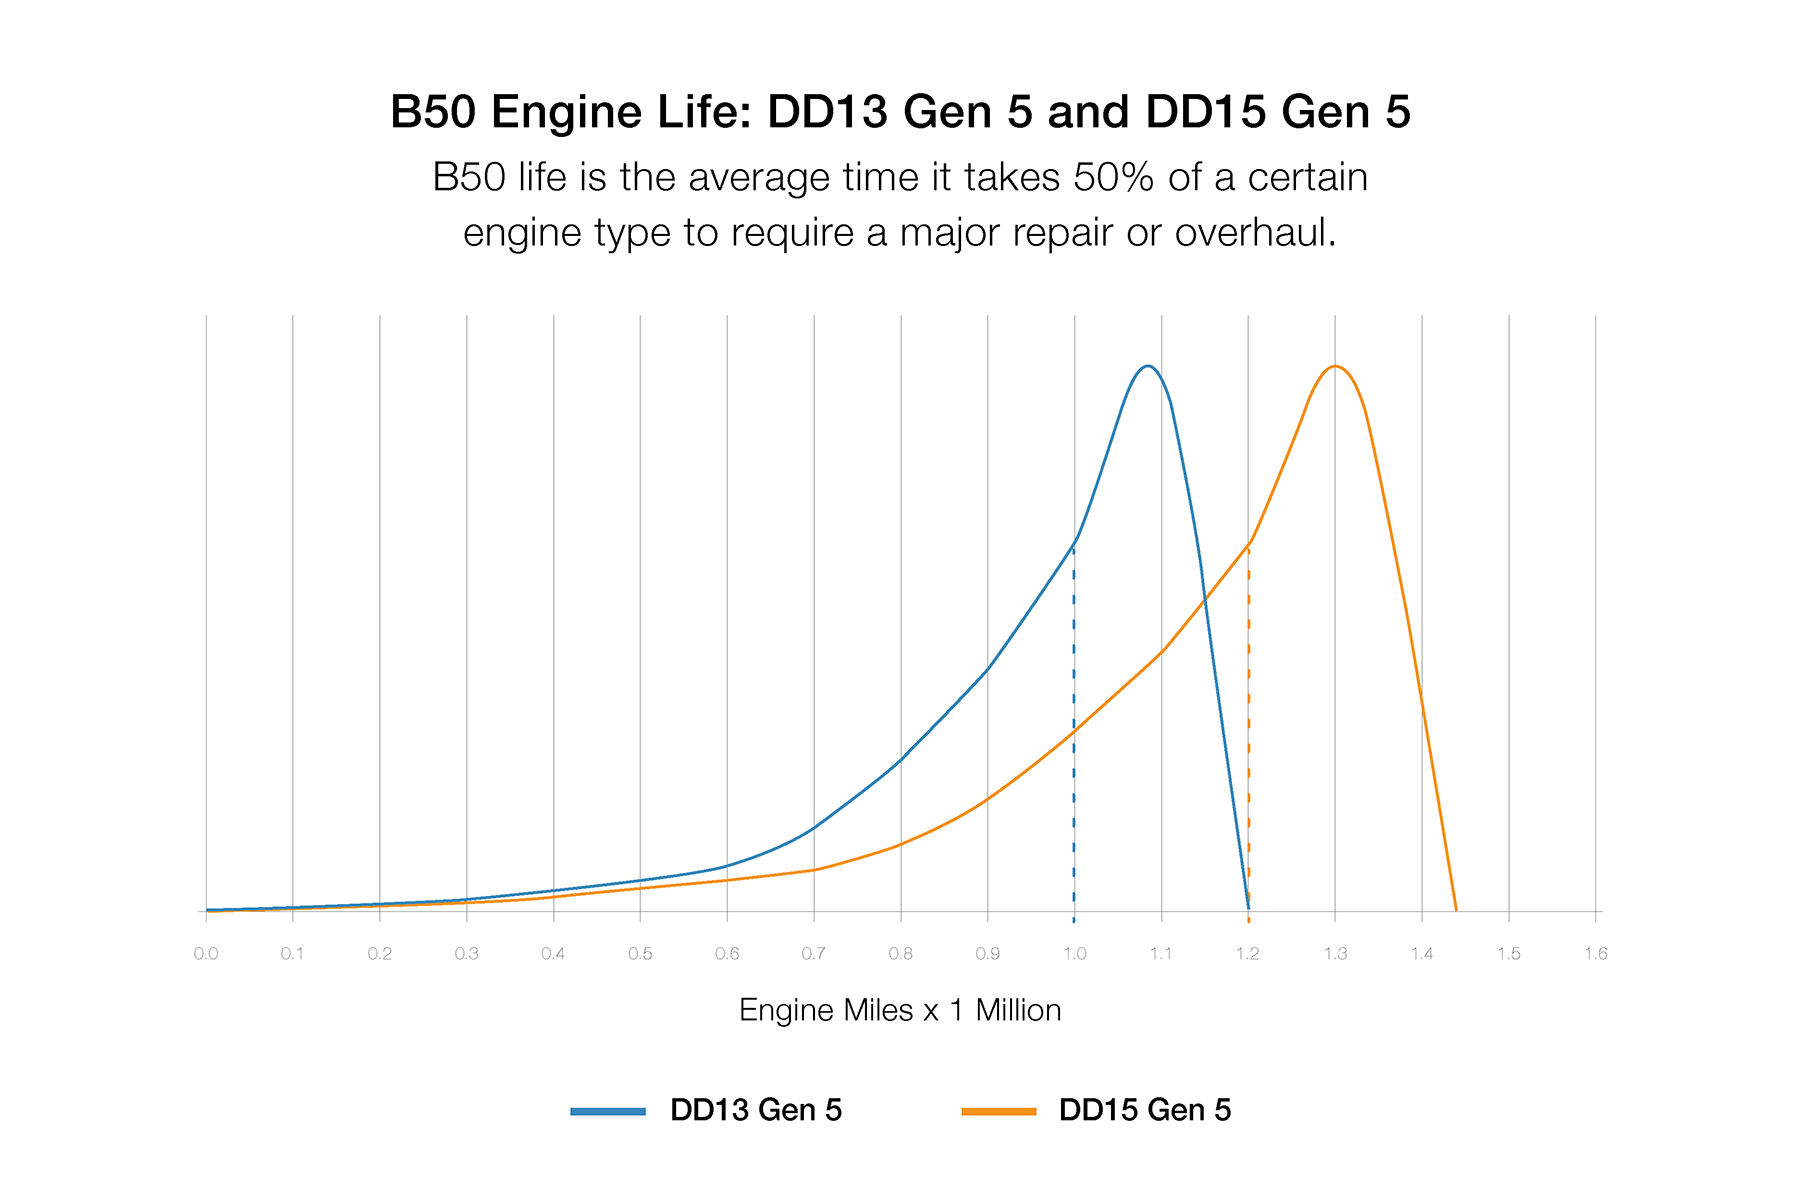 A graph that details the B50 engine life of the DD13 and the DD15 engines.